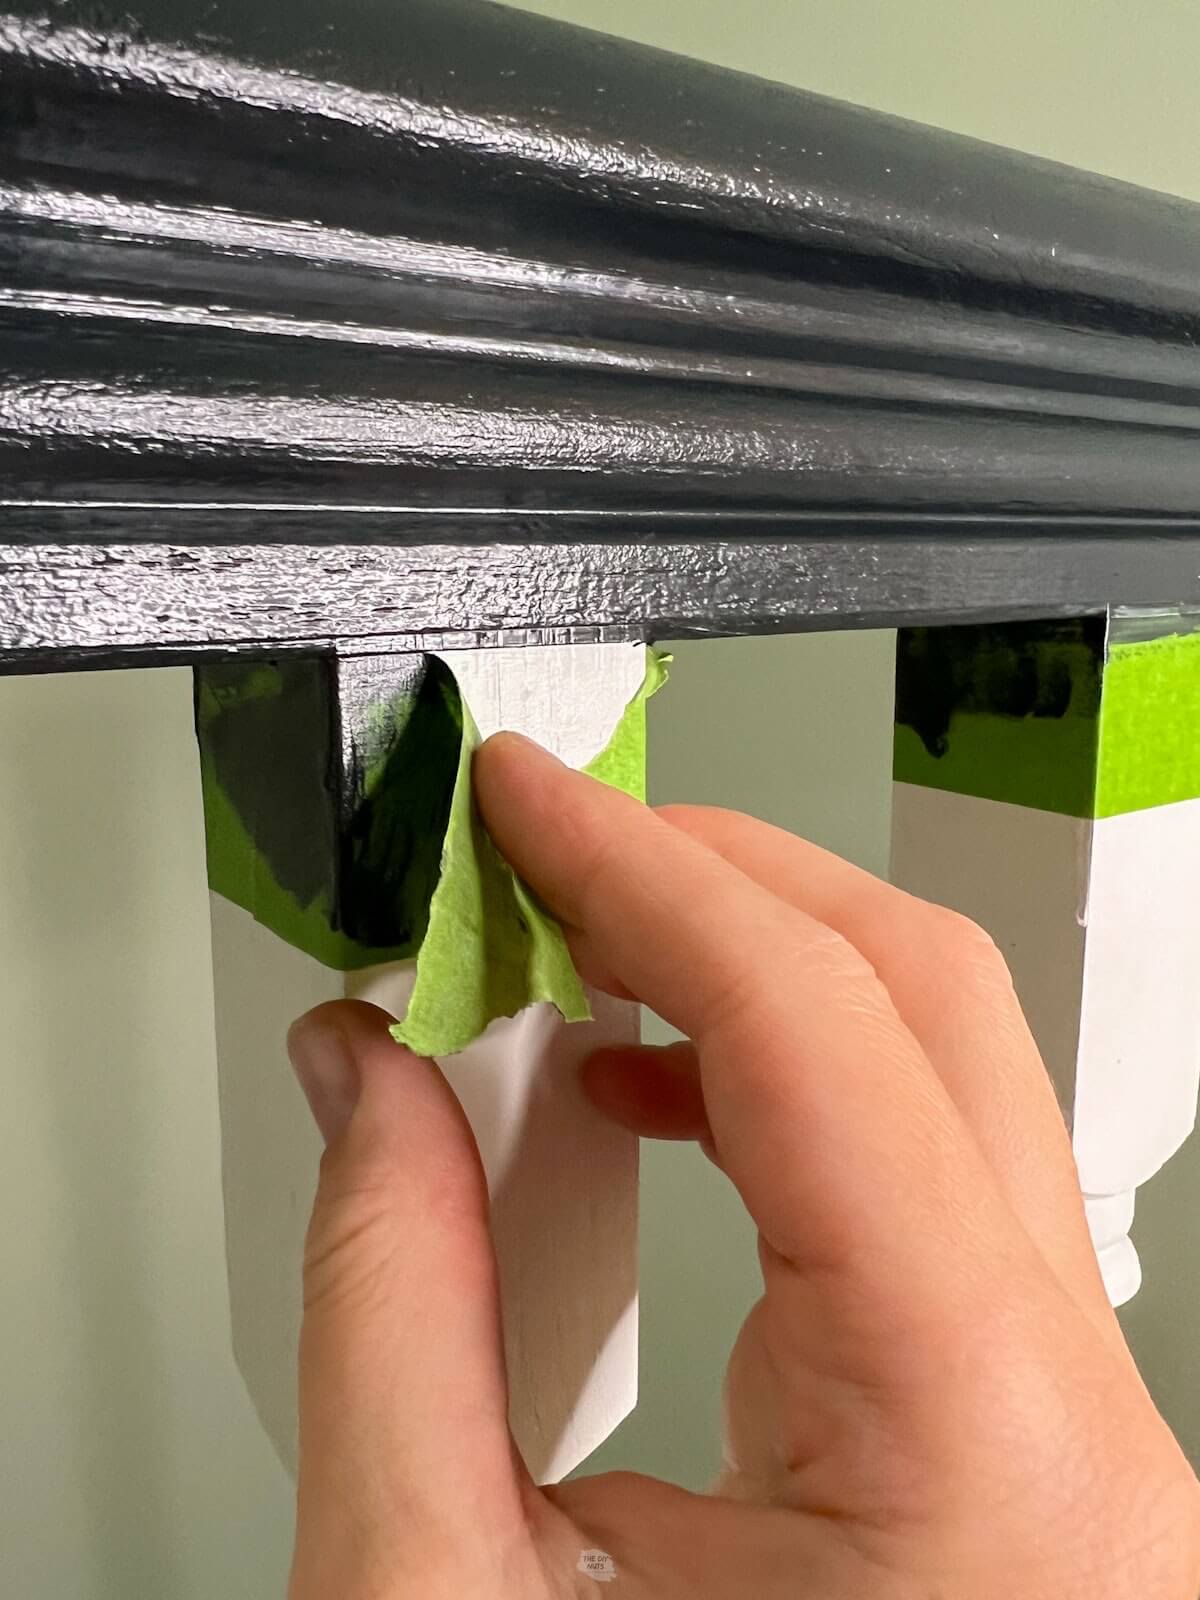 hand pulling green painter's tape off of black and white painted railing.